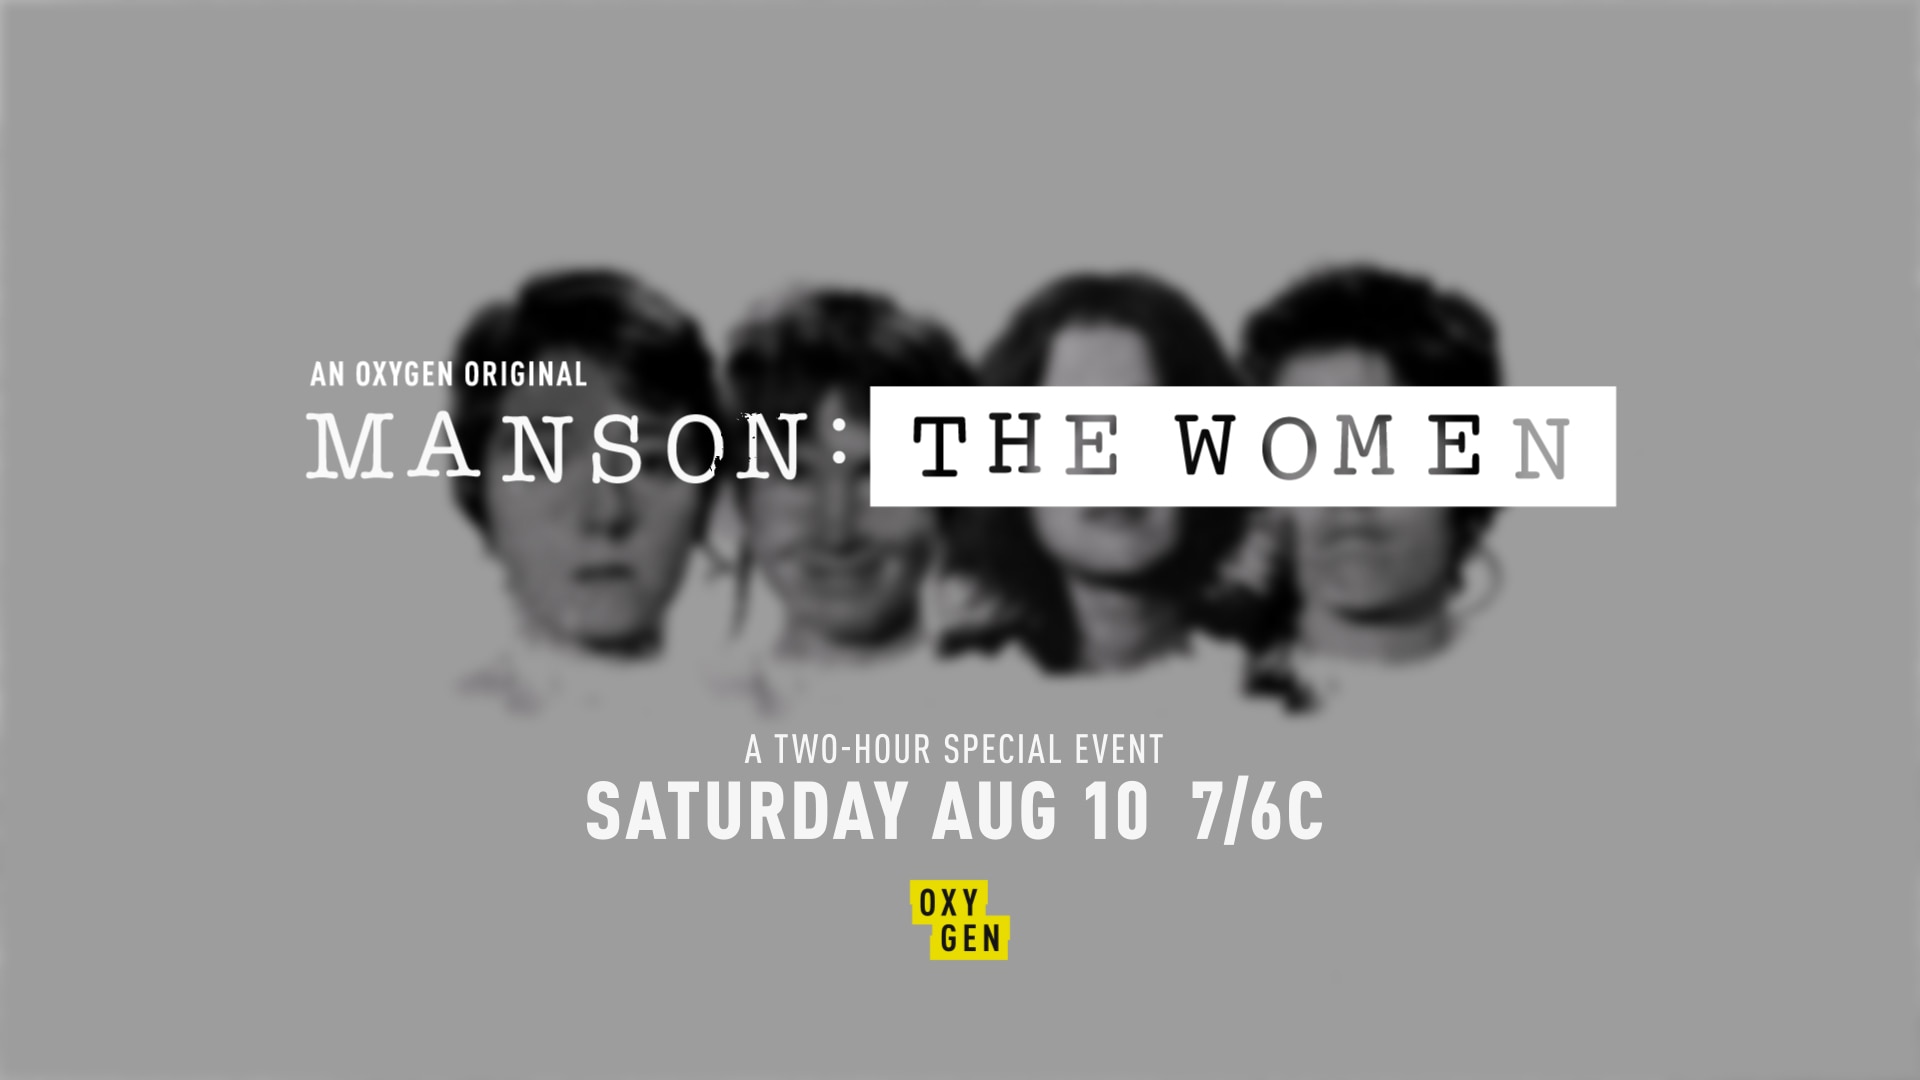 Creative image for "Manson: The Women"